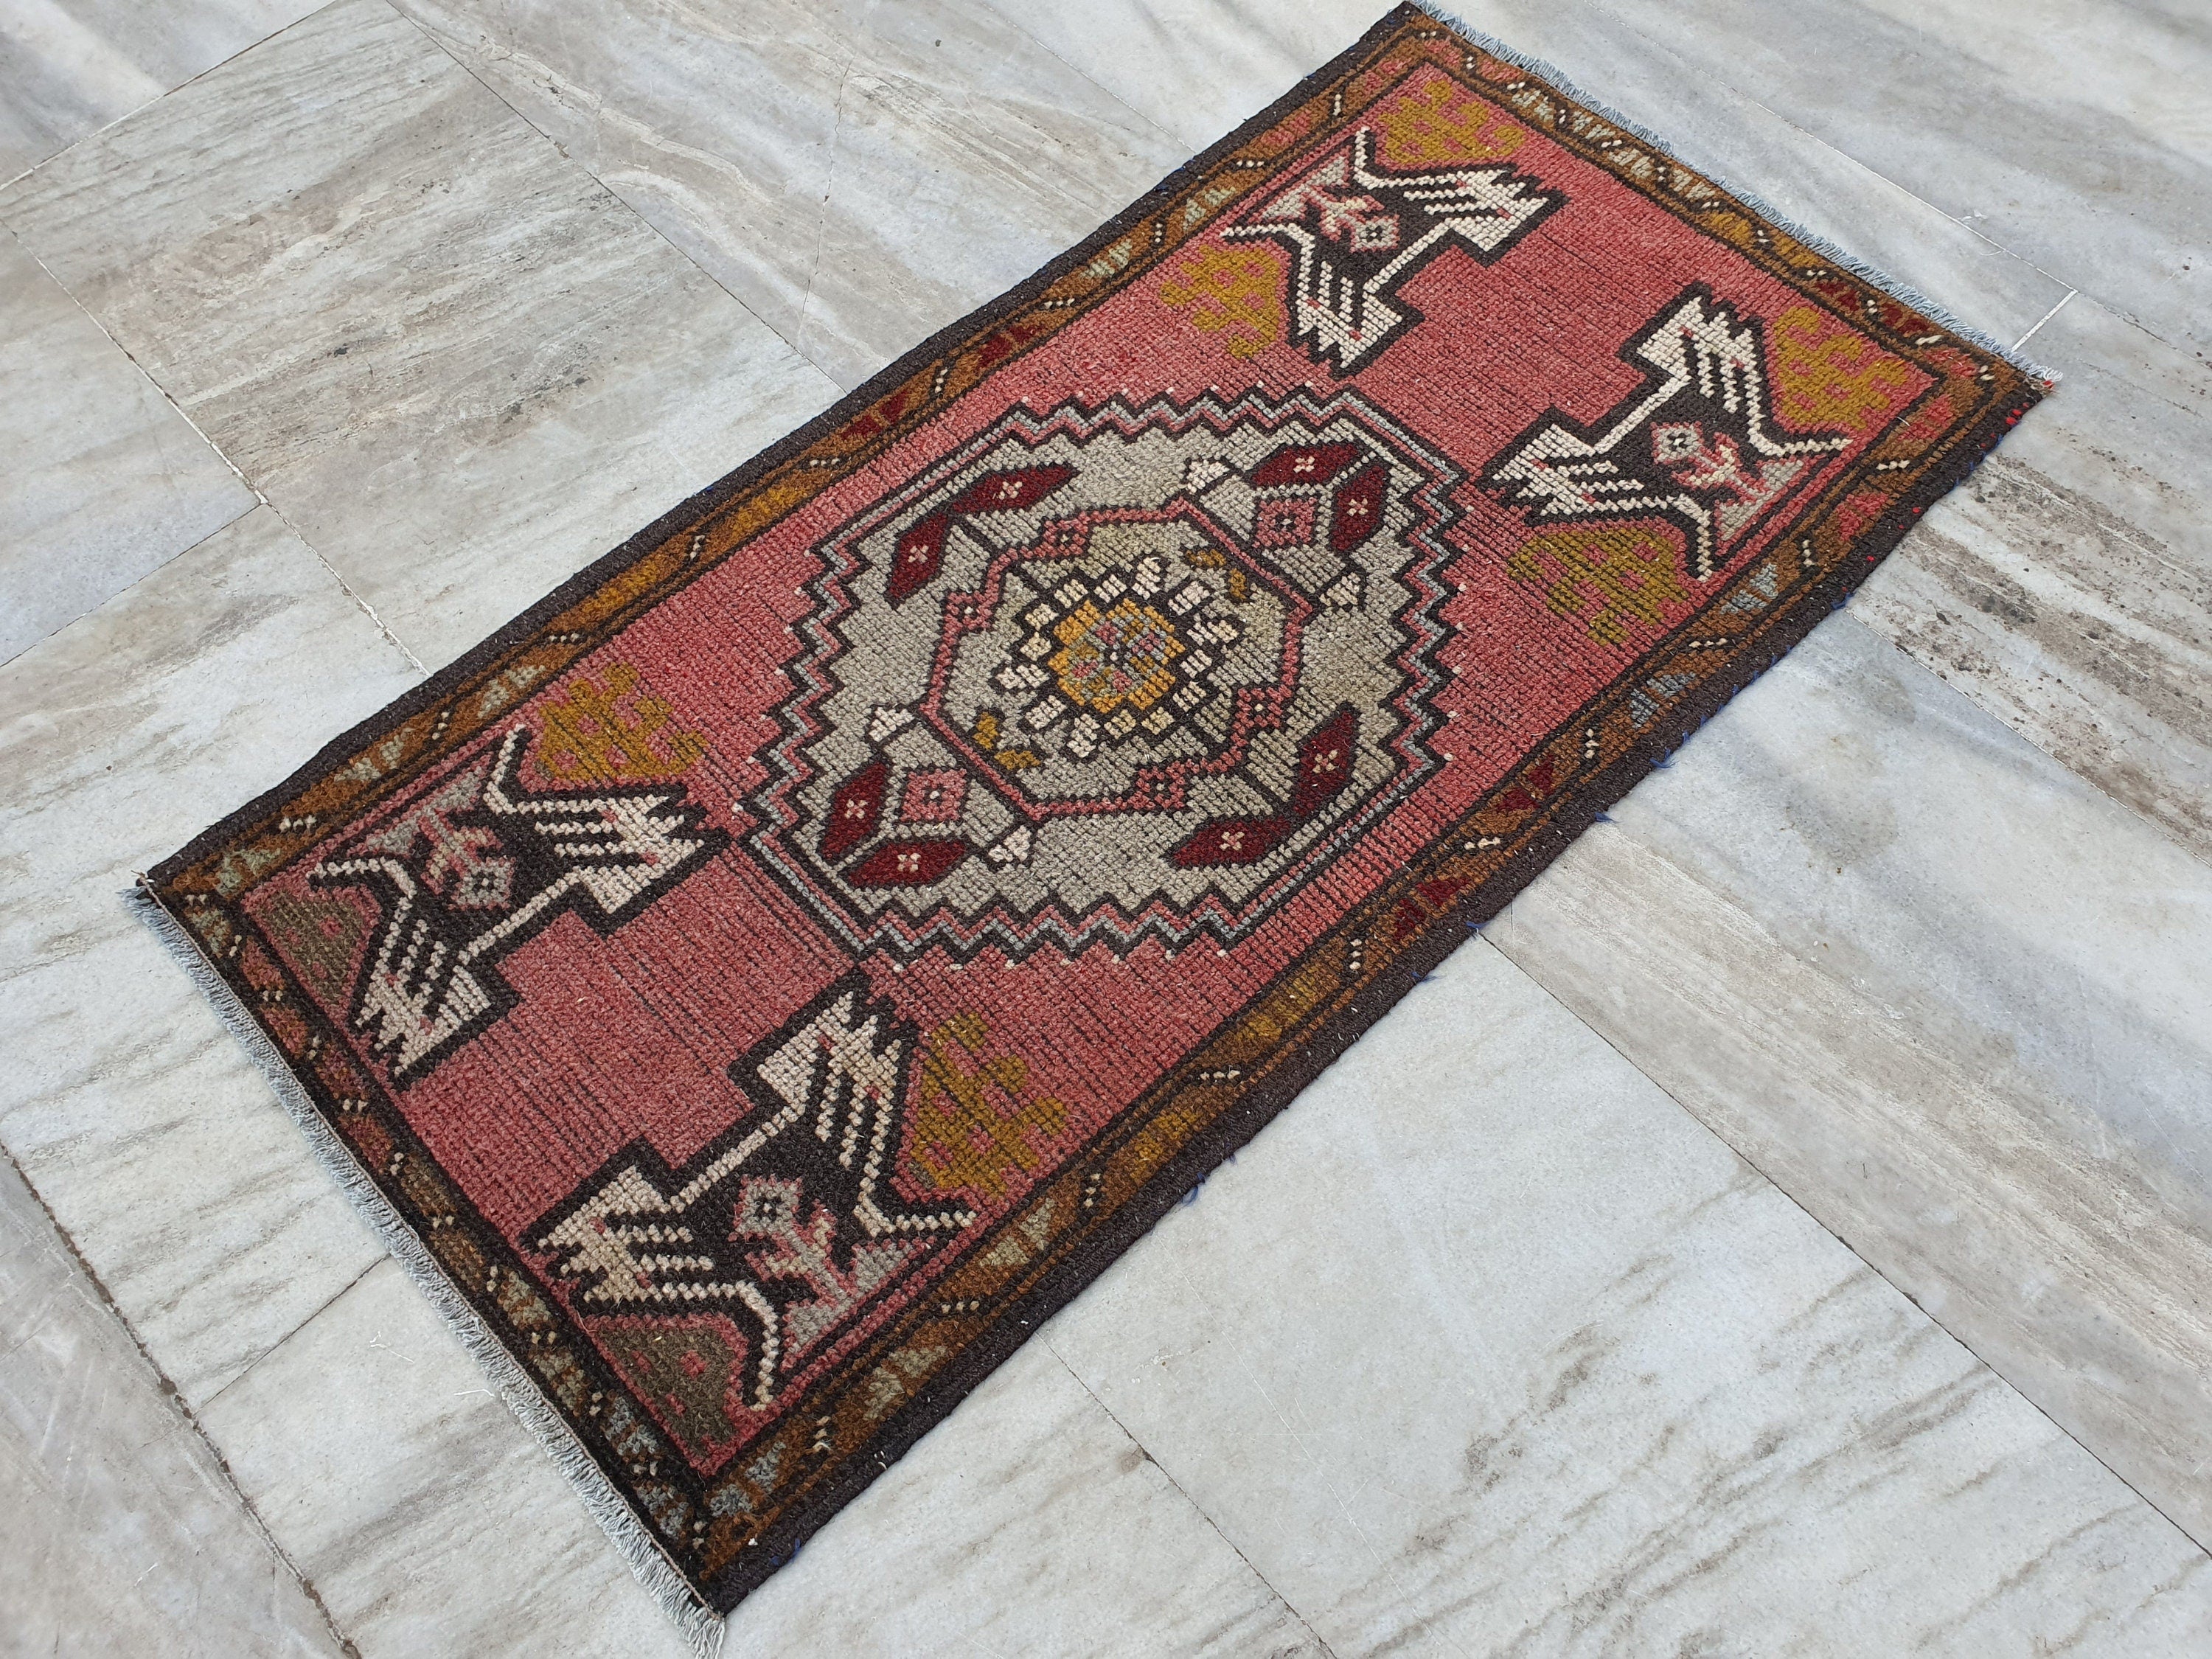 Vintage Turkish Small Rug,  3 ft 3 in x 1 ft 6 in, Pink, Blue/Grey and Beige Faded Distressed Antique Style Mat